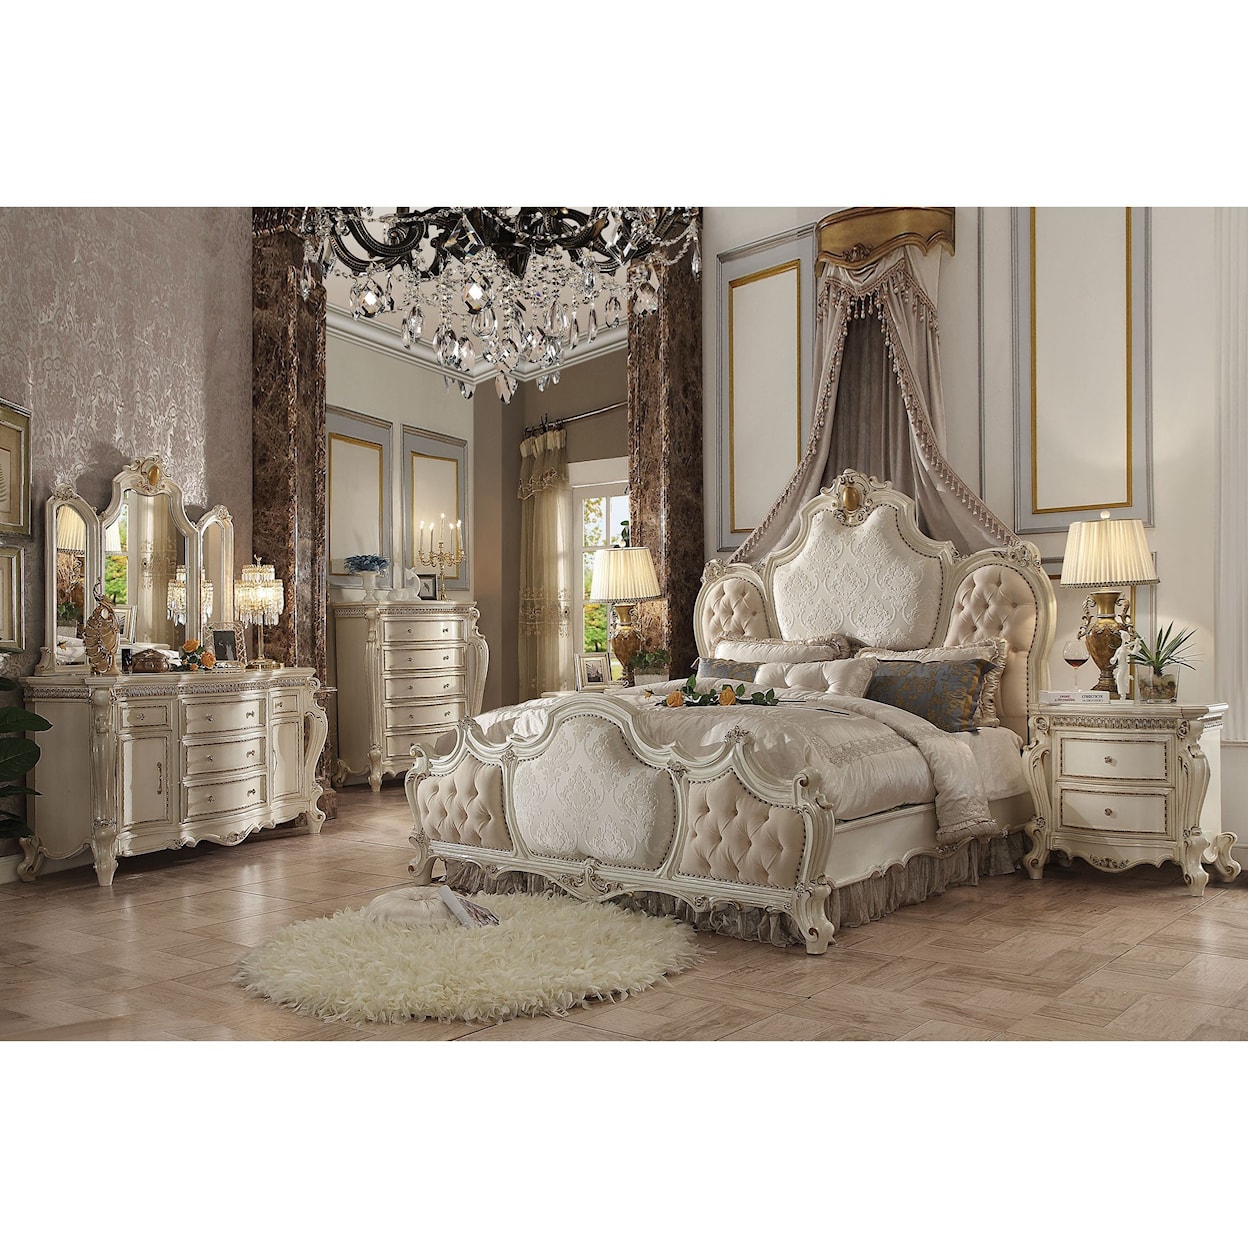 Acme Furniture Picardy Queen Bedroom Group